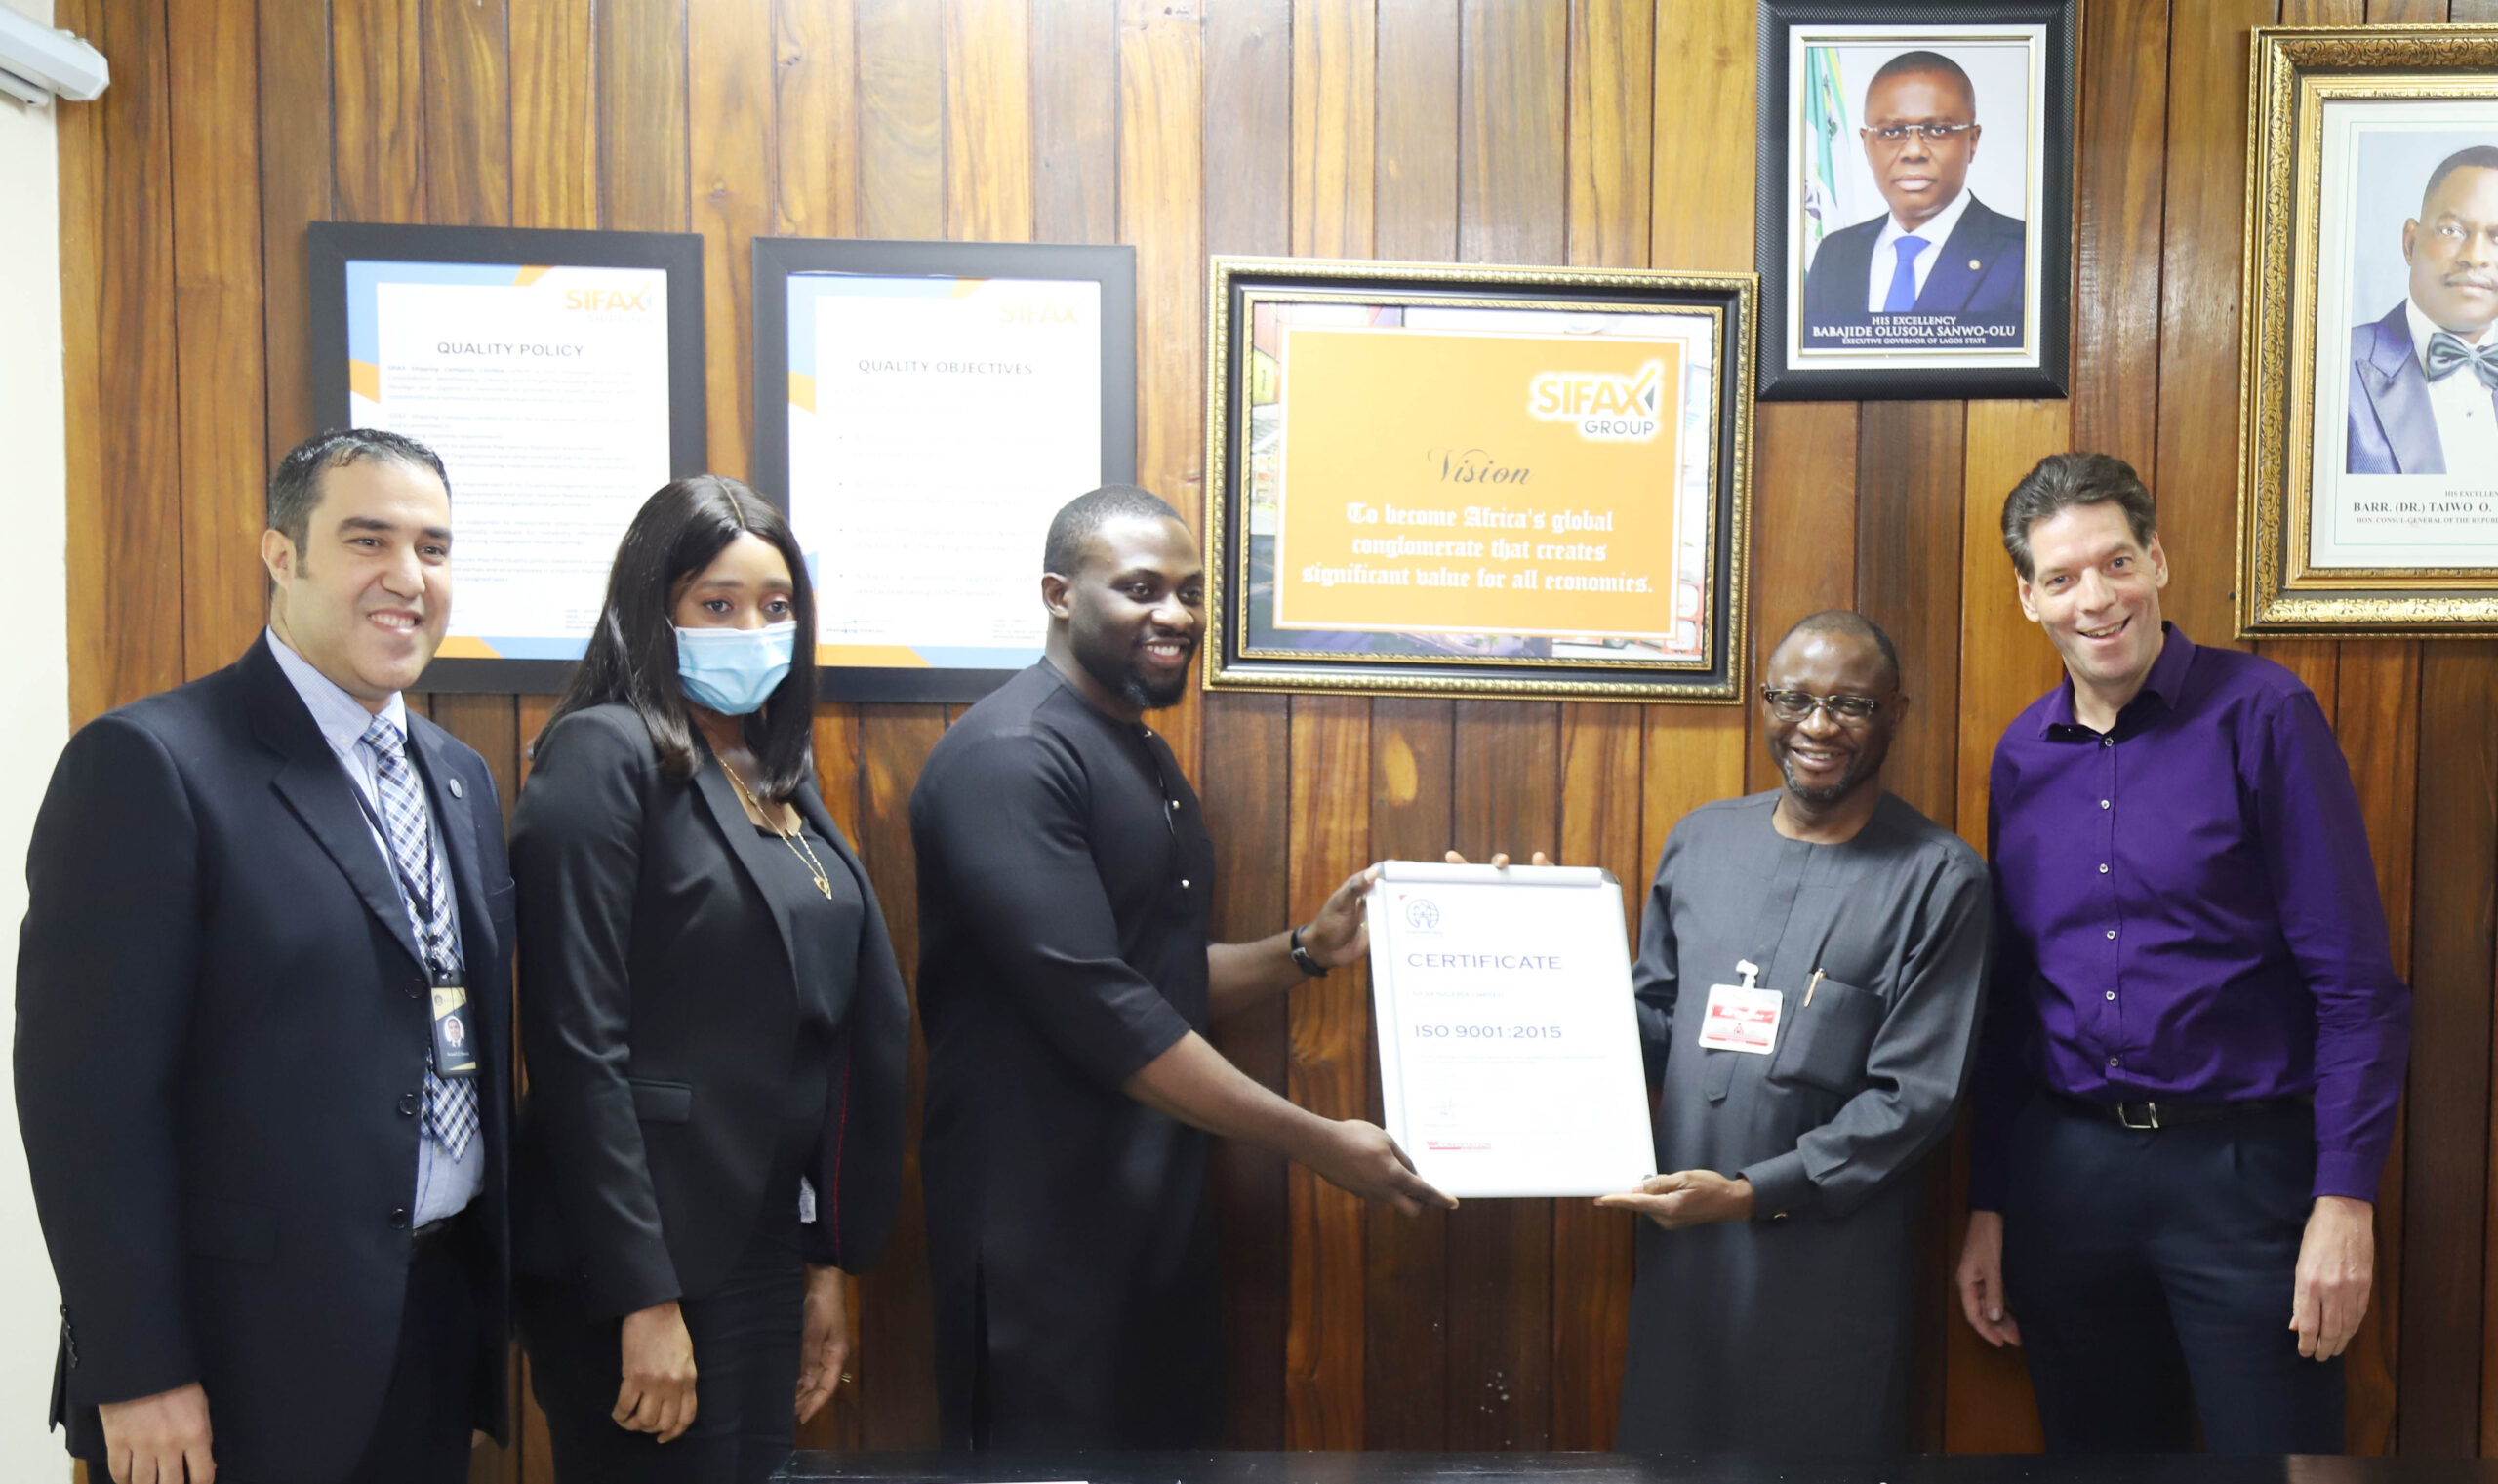 L-R: Samuel Sawah, Technical Director; Francisca Dyegh, Executive Director, Business Development and Ope Bashorun, Chief Executive Officer all of West Sealand Int’l Security Services Limited presenting the International Organisation for Standardisation 9001:2015 (ISO) certificate to Adekunle Oyinloye, Group Managing Director, SIFAX Group and Paul vd Linden, Managing Director, SIFAX Logistics. Three of SIFAX Group’s subsidiaries- Ports & Cargo Handling Services Limited, SIFAX Shipping Company Limited and SIFAX Nigeria Limited all bagged the ISO 9001:2015 certificates. The award presentation ceremony was held at SIFAX Group’s head office at Apapa, Lagos, today.